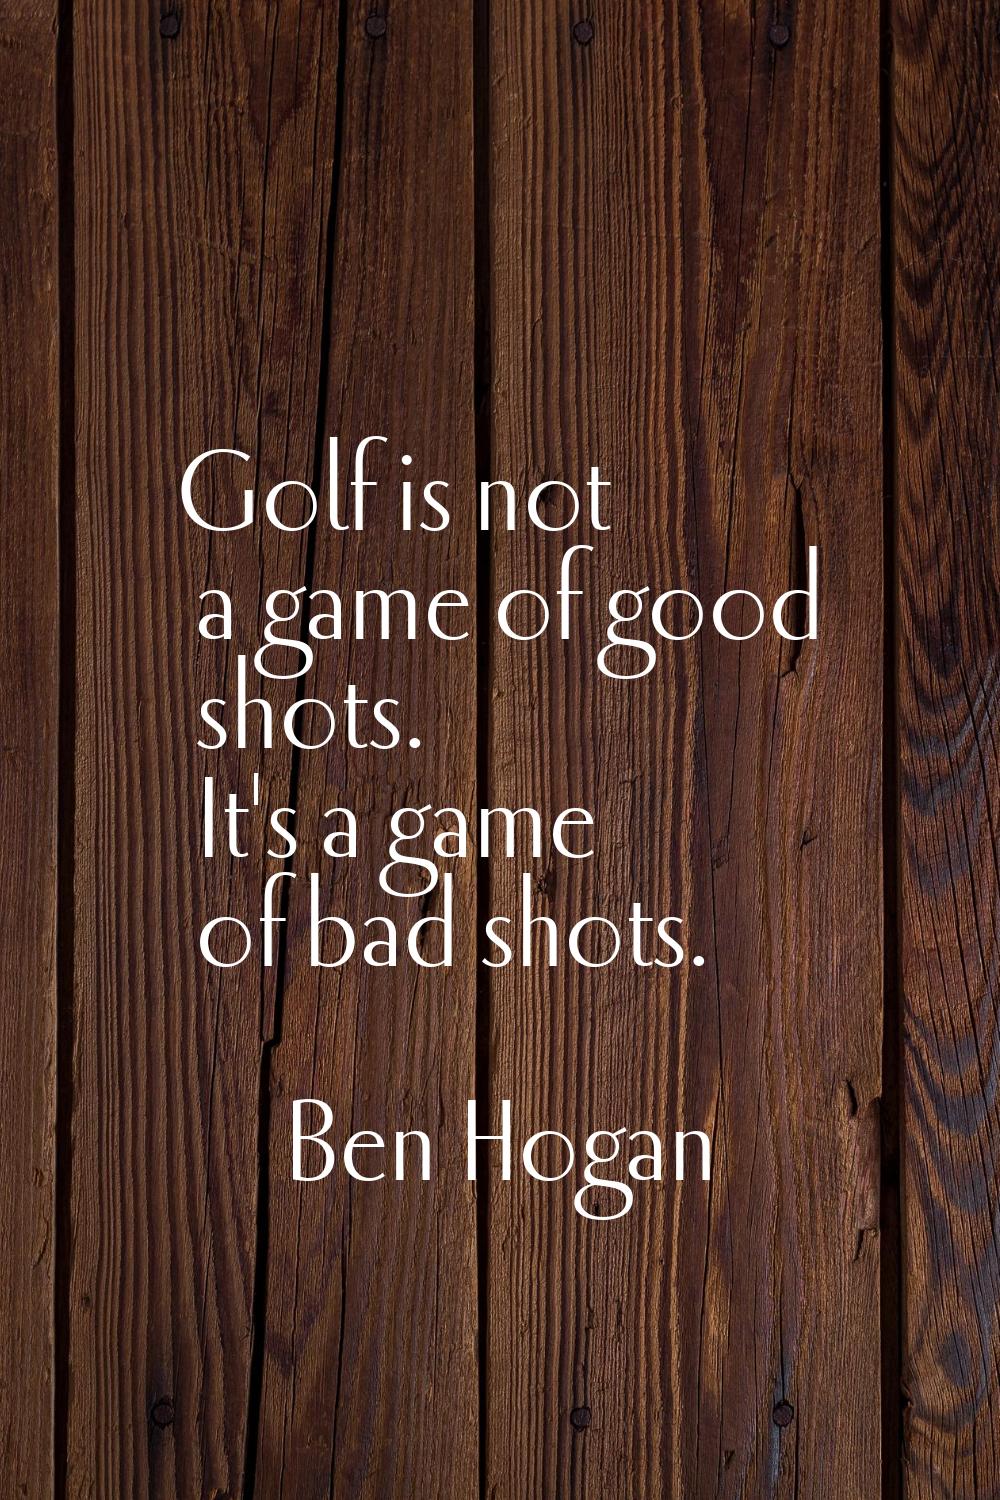 Golf is not a game of good shots. It's a game of bad shots.